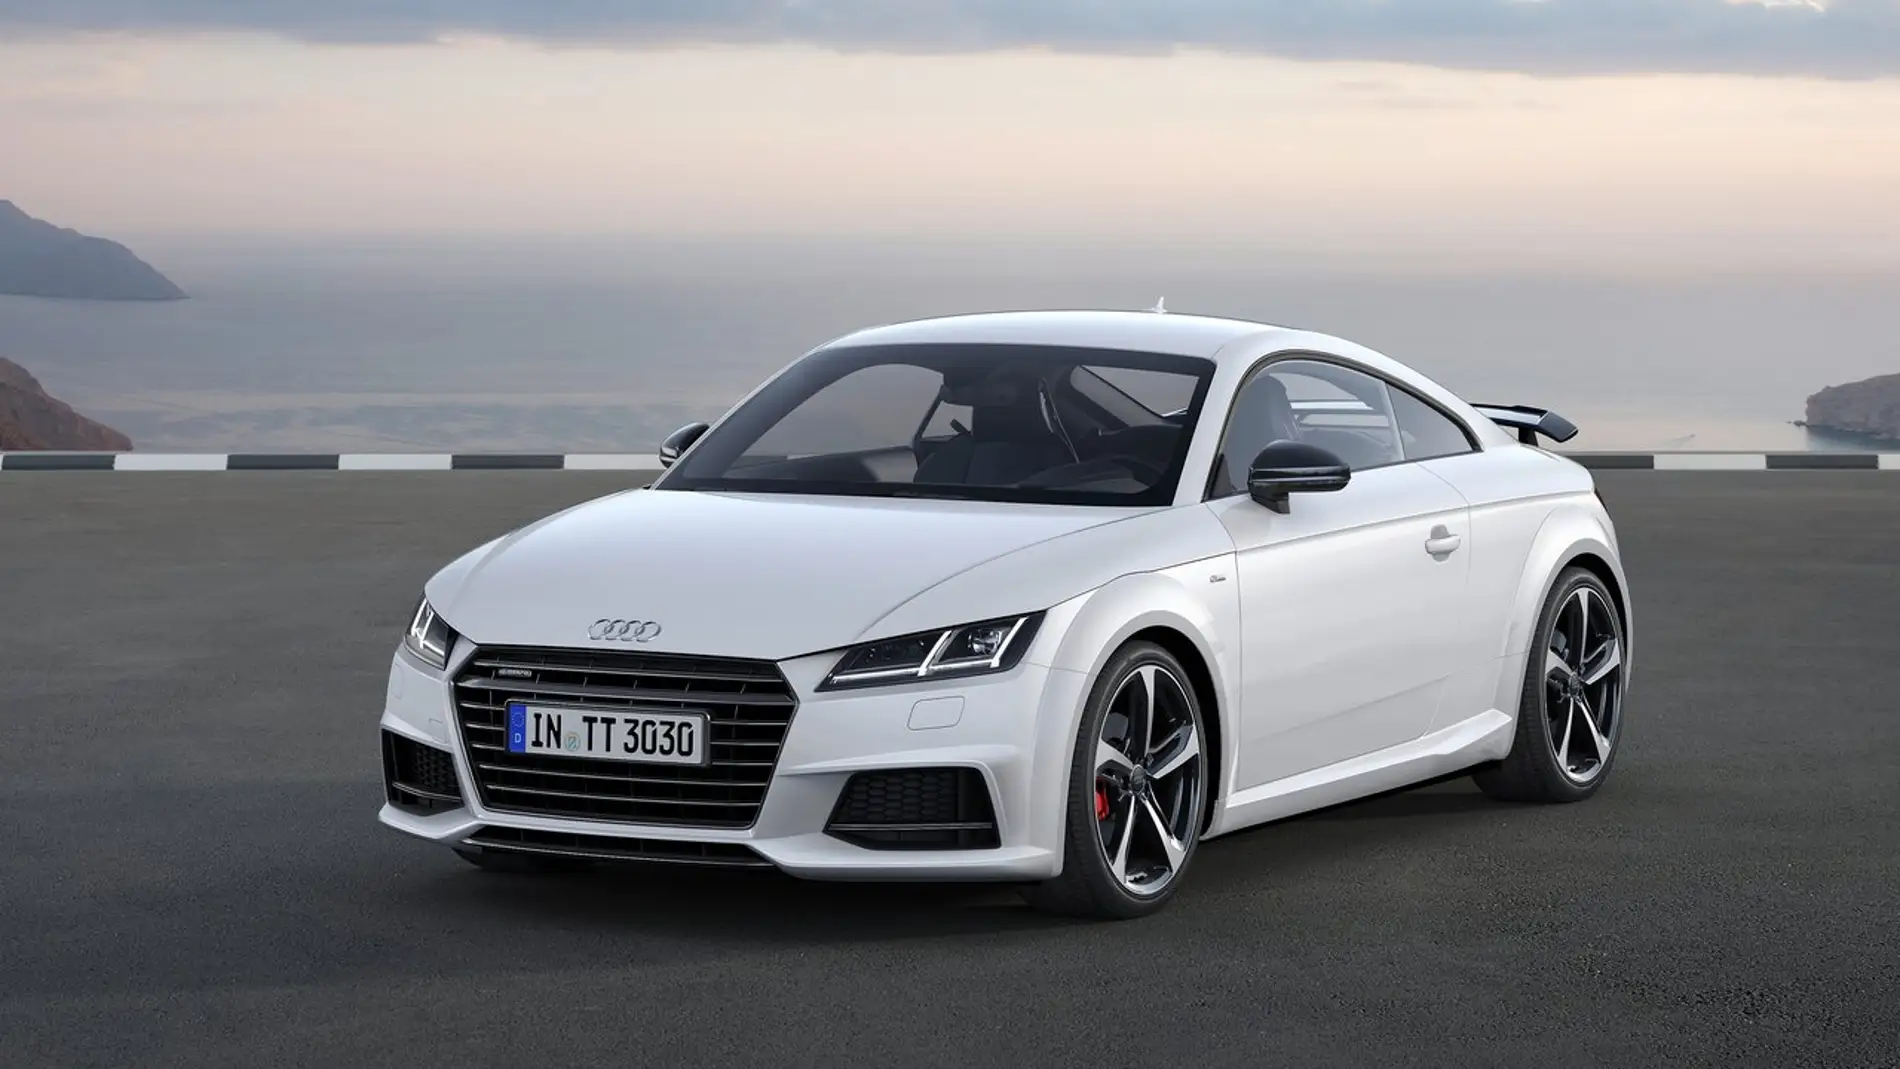 Audi-TT_Coupe_S_line_competition-2017-1280-01.jpg